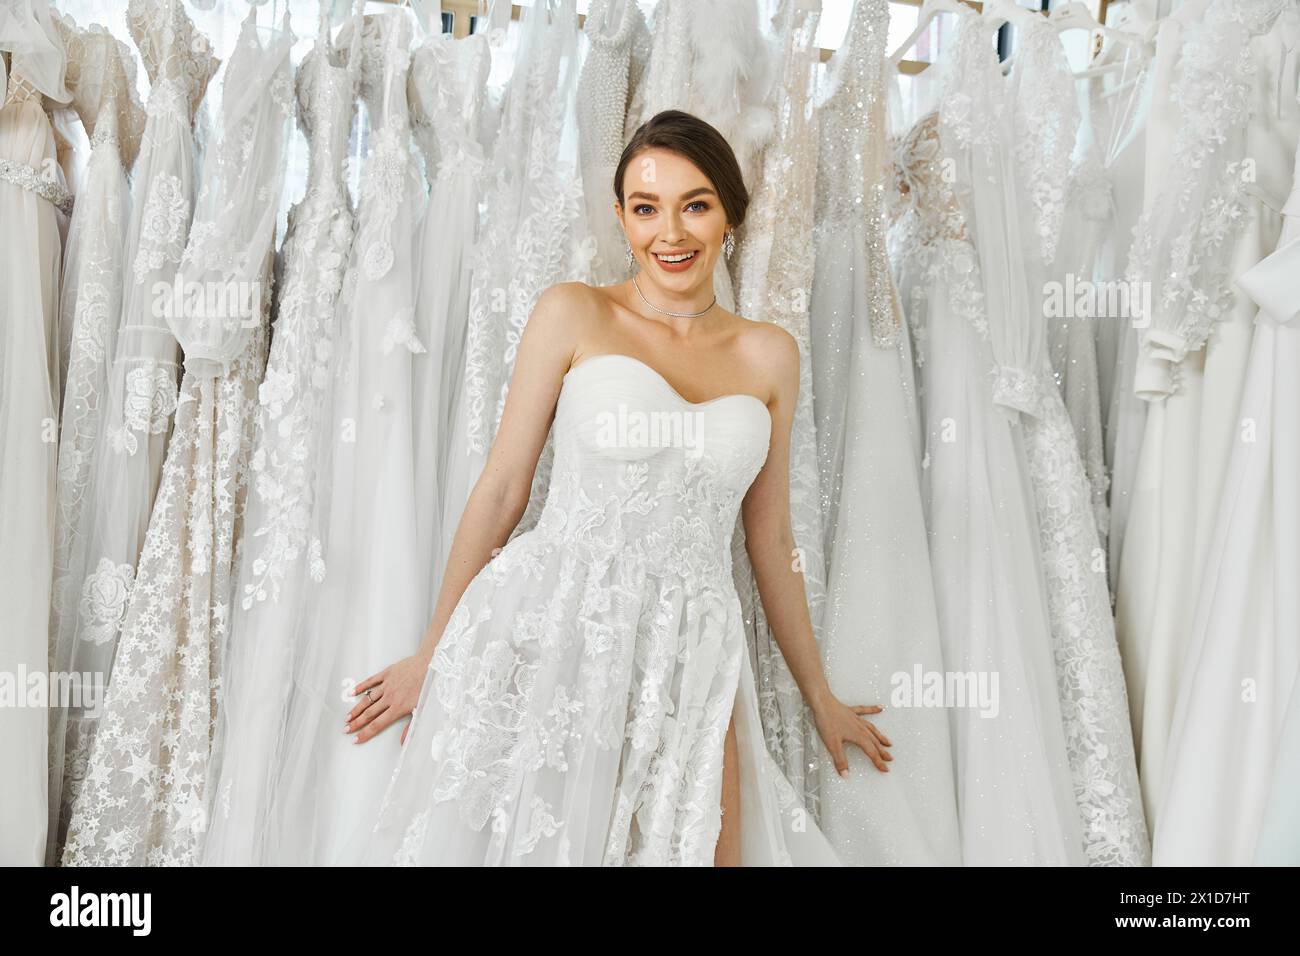 A young brunette bride stands surrounded by a rack of dresses in a wedding salon, looking for her perfect gown. Stock Photo